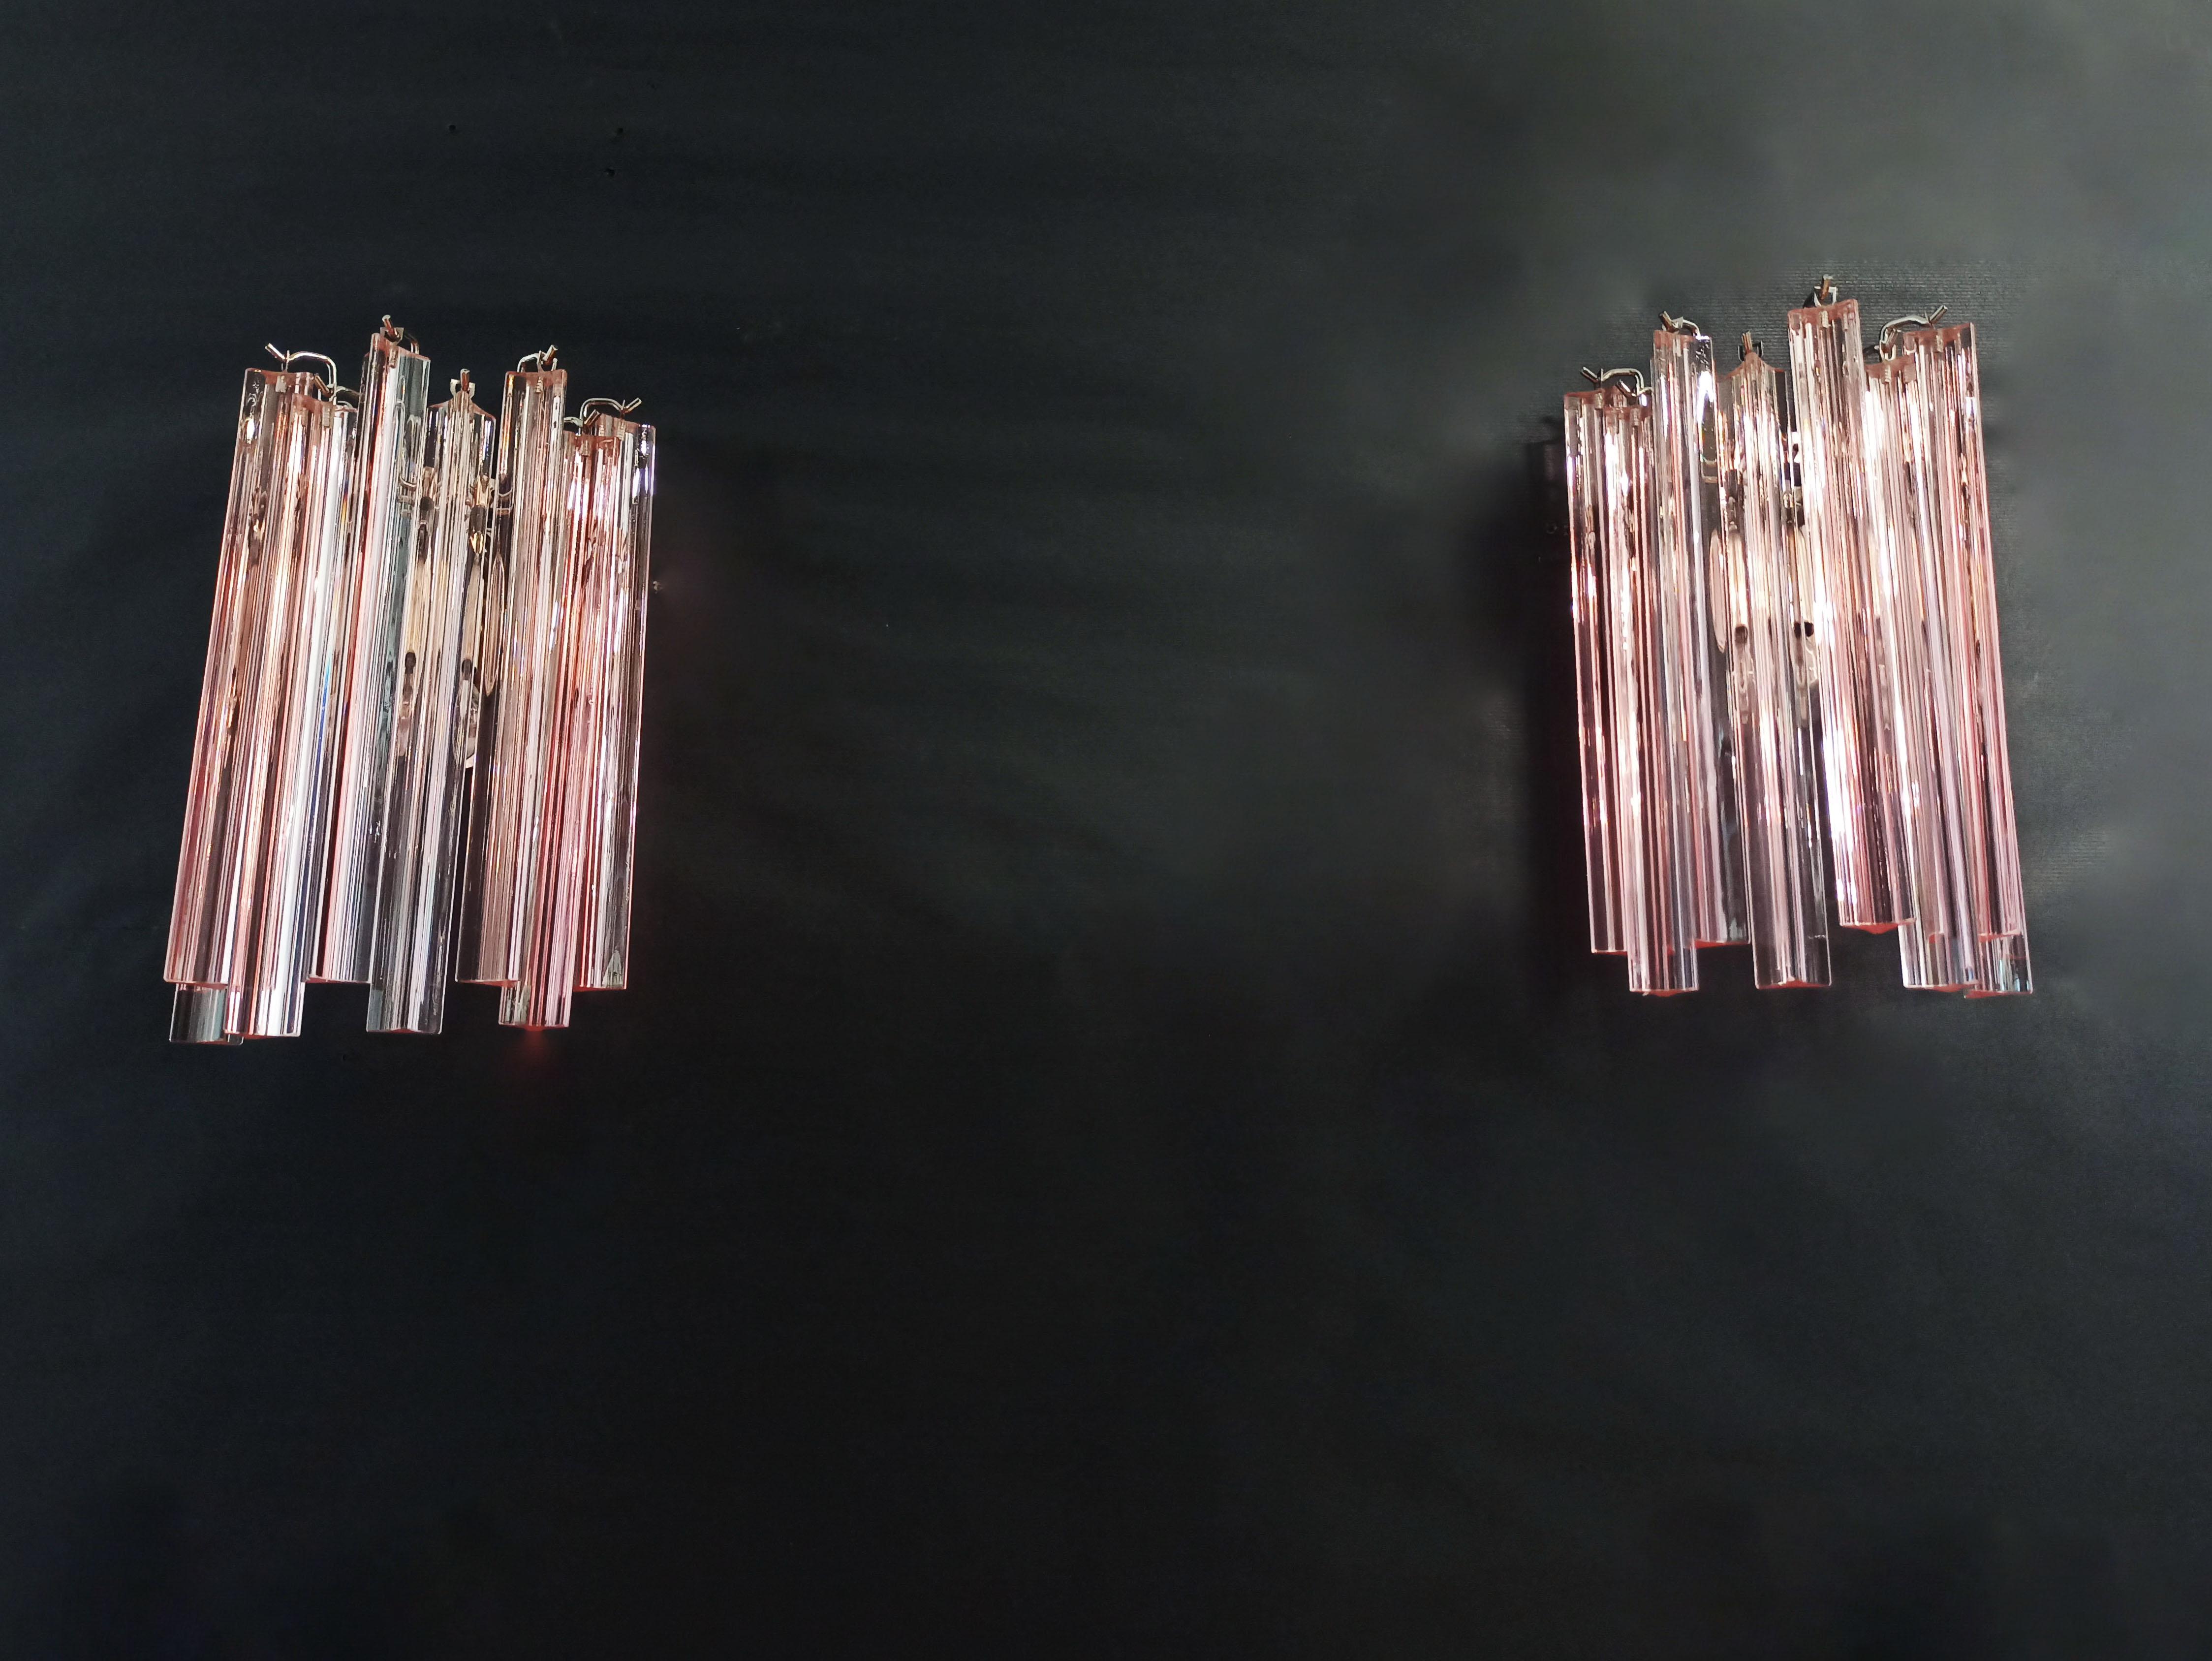 Fantastic pair of vintage Murano wall sconce made by 9 Murano pink crystal prism (triedri) for each applique in a chrome metal frame.
Period: Late 20th century
Dimensions: 12.40 inches height (32 cm), 7.8 inches width (20 cm), 5 inches depth from